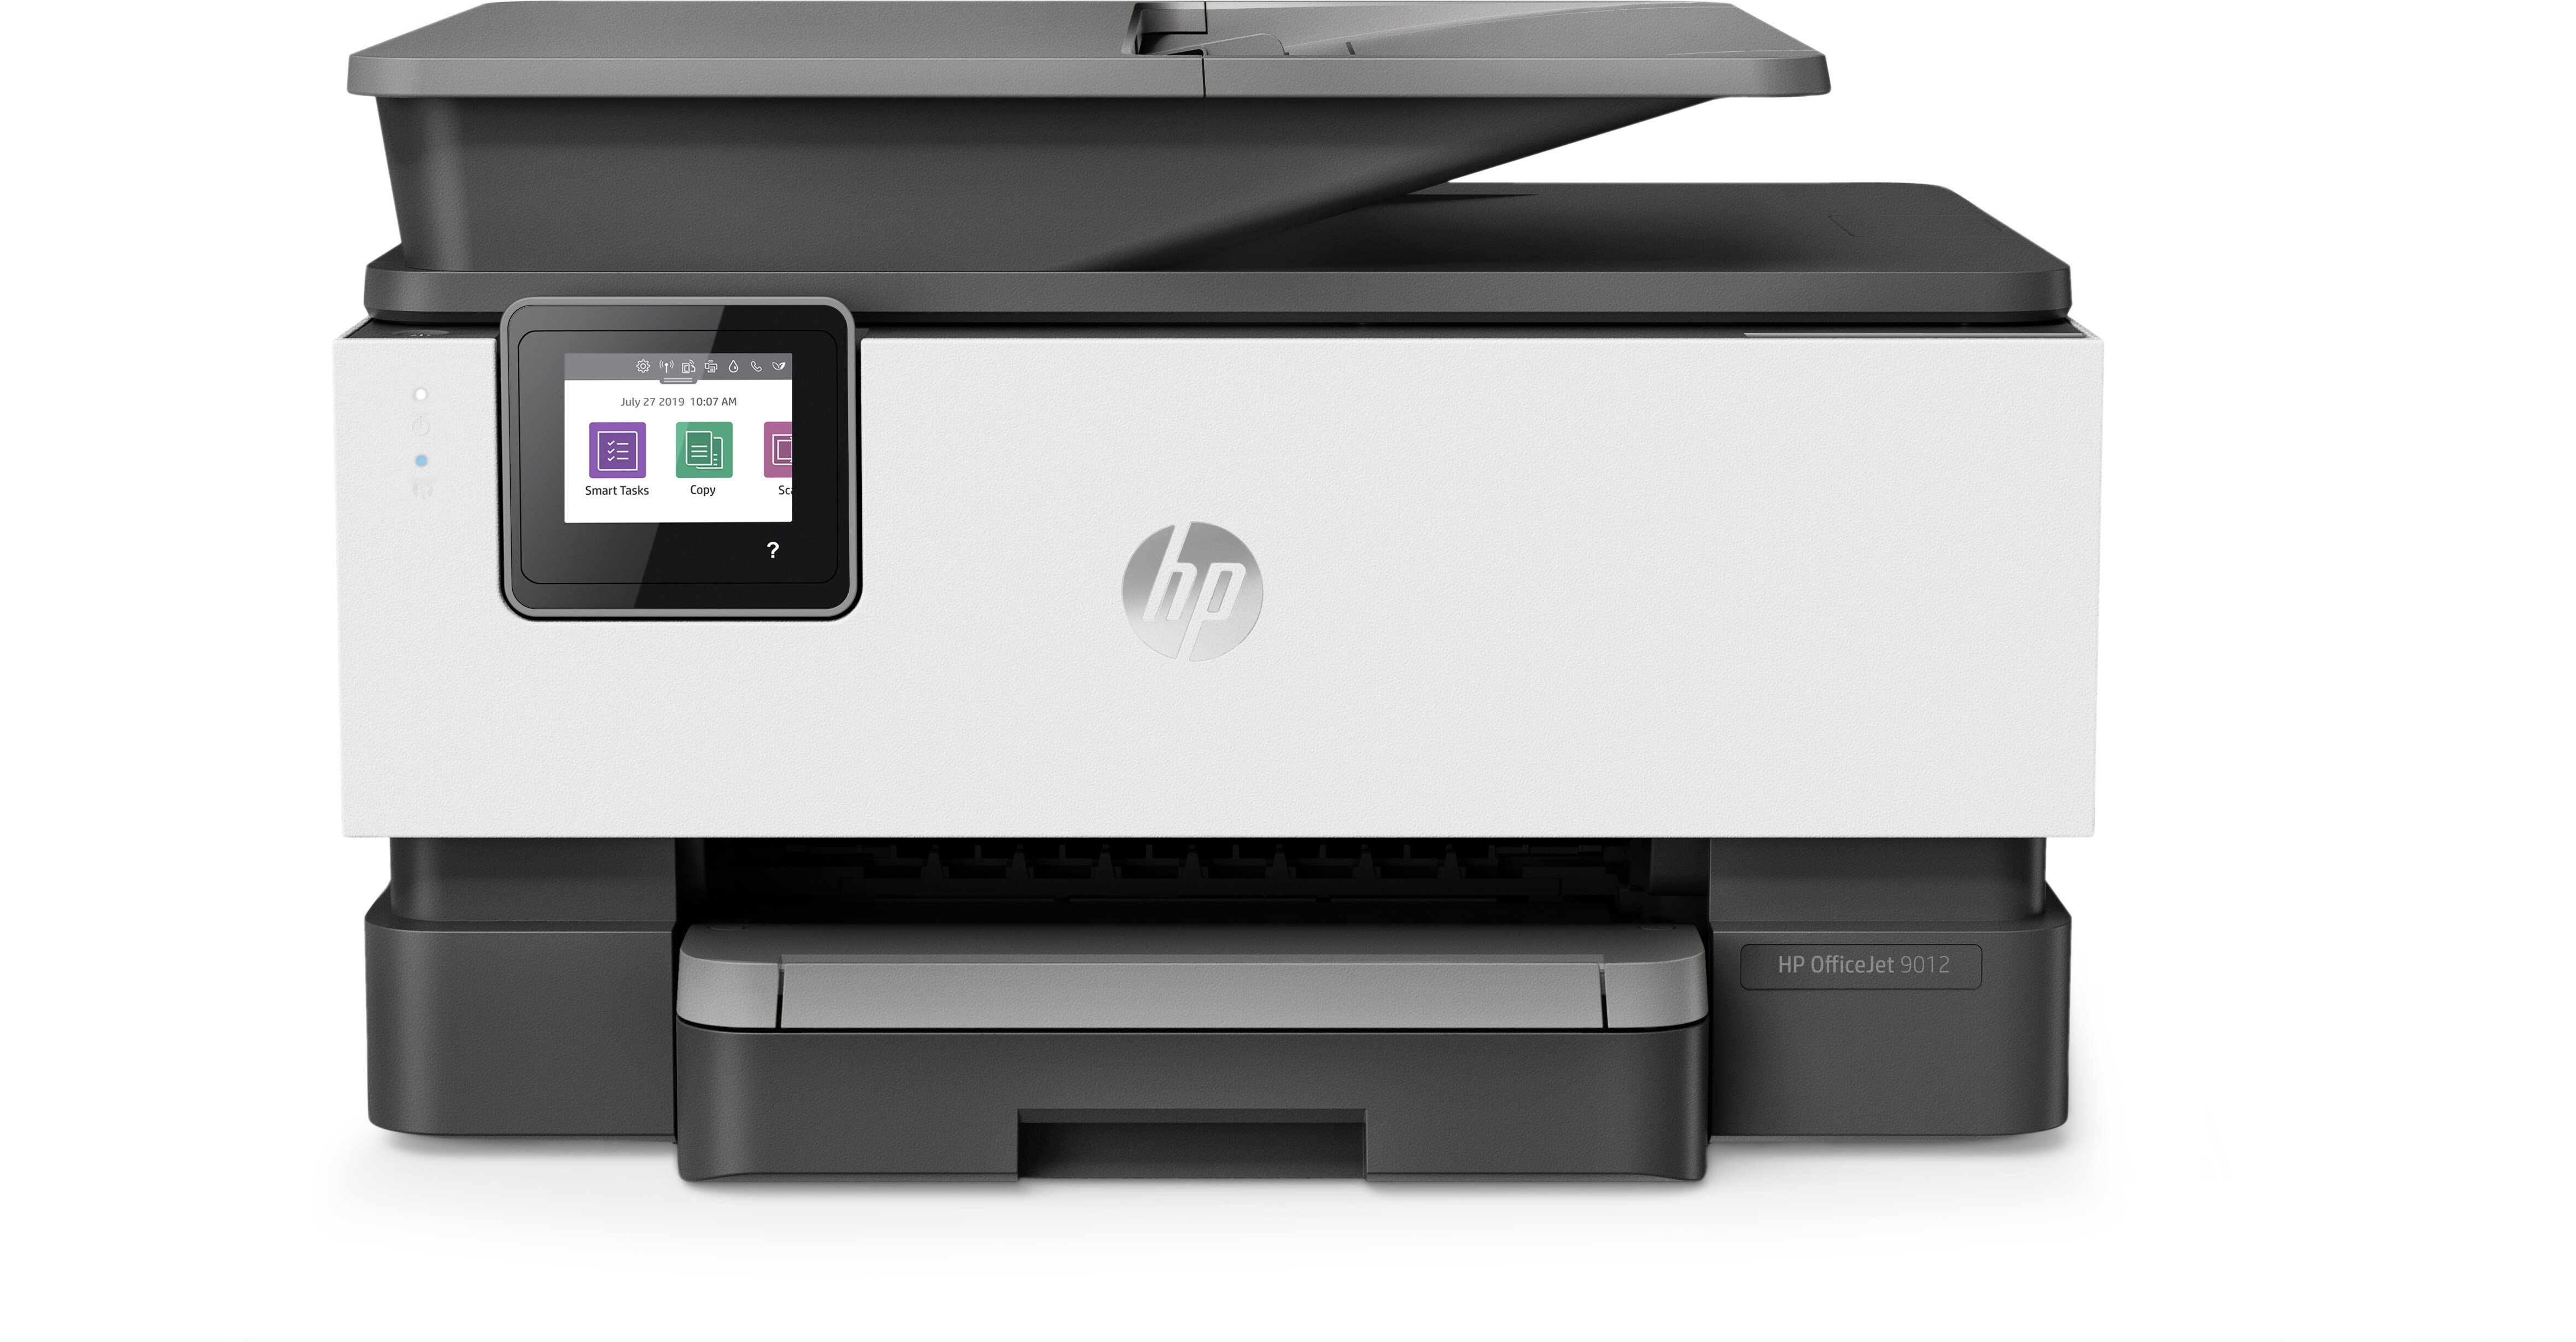 HP OfficeJet Pro 9012 All-in-One Printer